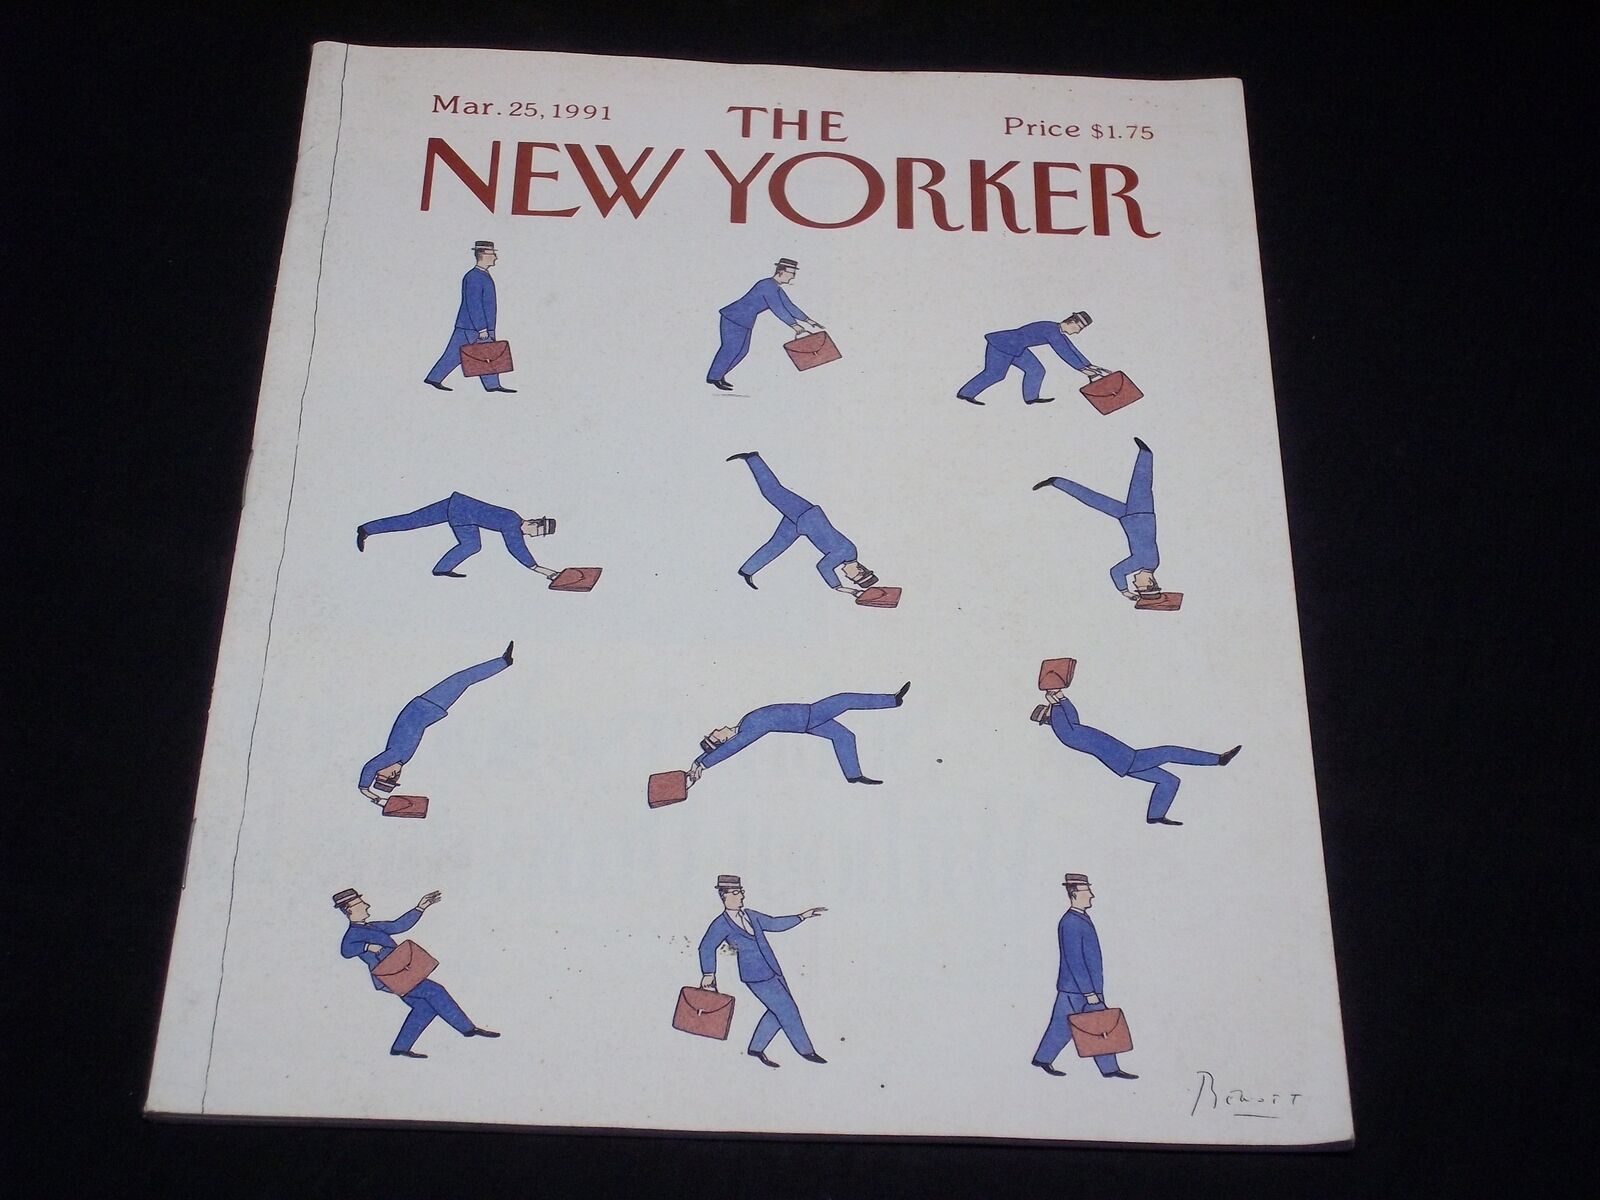 1991 MARCH 25 THE NEW YORKER MAGAZINE - NICE ILLUSTRATED COVER - L 5211